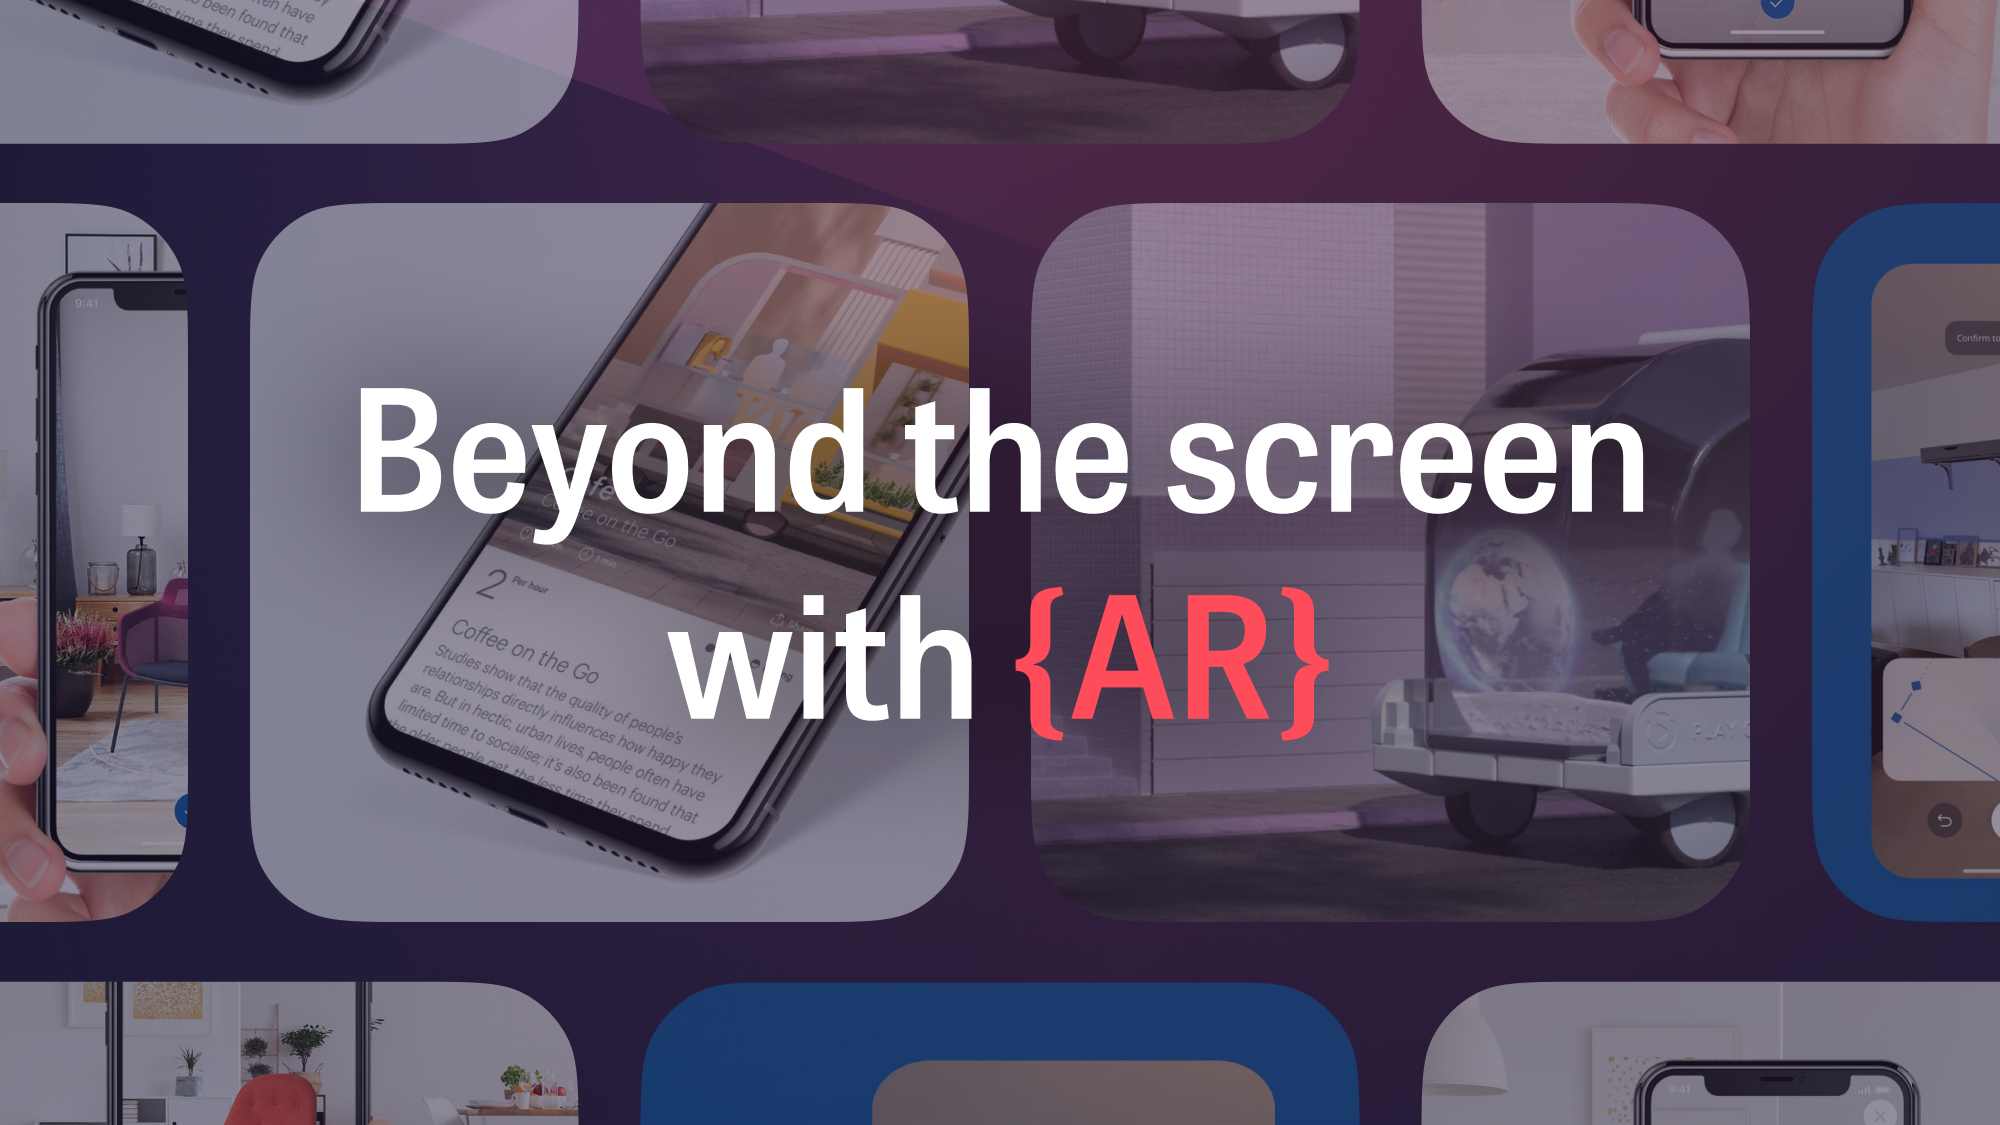 Go beyond the screen with AR